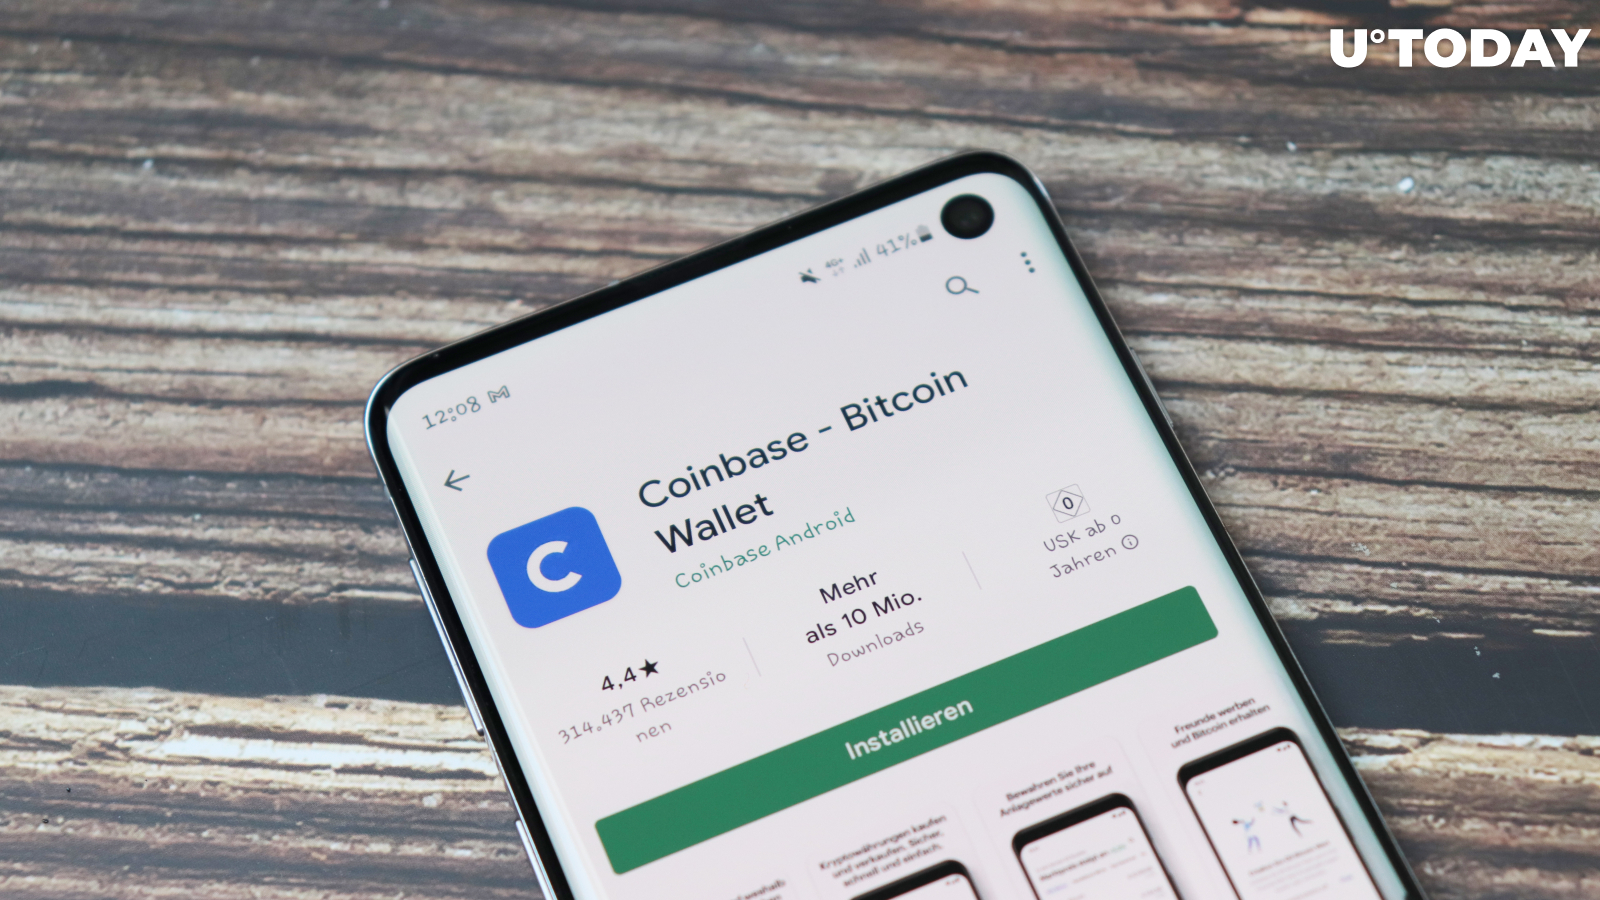 coinbase wallet browser extension